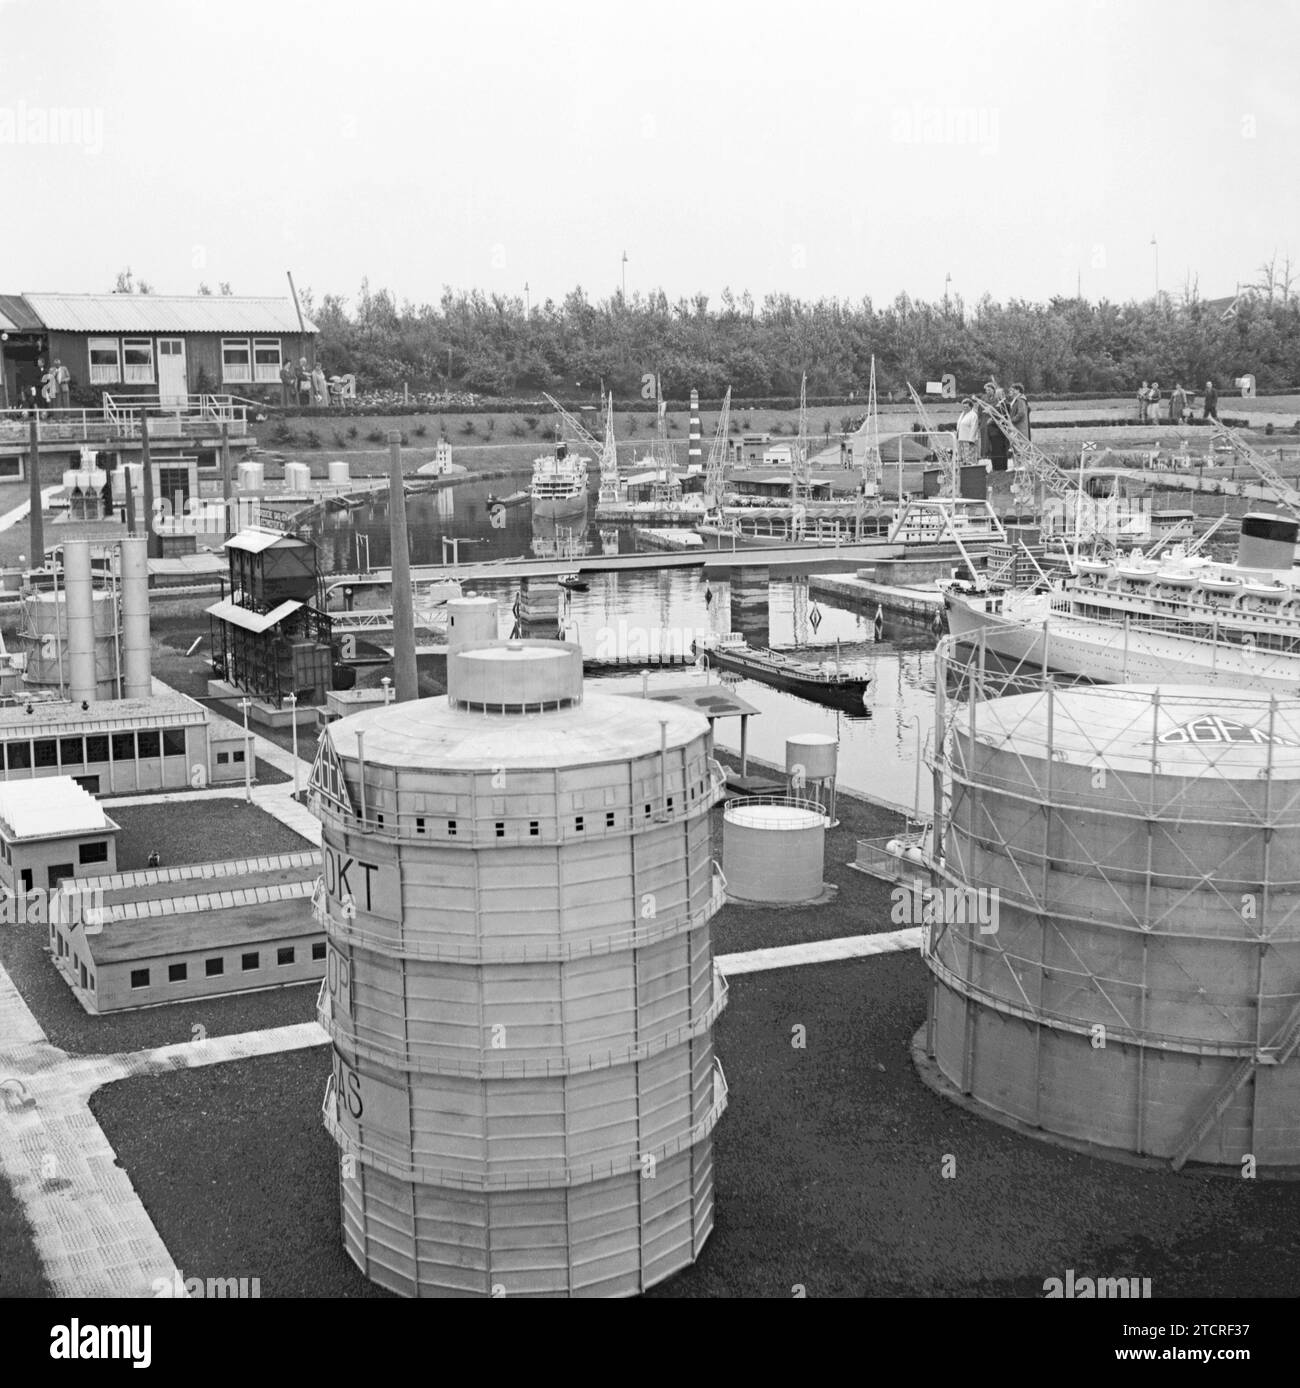 Madurodam, The Hague, Netherlands photographed in 1955 – this view shows the industrial part of the park with its port, ships and gas holders (gasometers) foreground. Madurodam is a miniature theme park, model ‘village’ and tourist attraction in the Scheveningen district of The Hague. It is home to a range of 1:25 scale model replicas of famous Dutch landmarks and lifestyle, historical cities, industry and developments. The park was opened in 1952 and tens of millions of visitors have visited the attraction with profits from the park going towards various charities in the Netherlands. Stock Photo